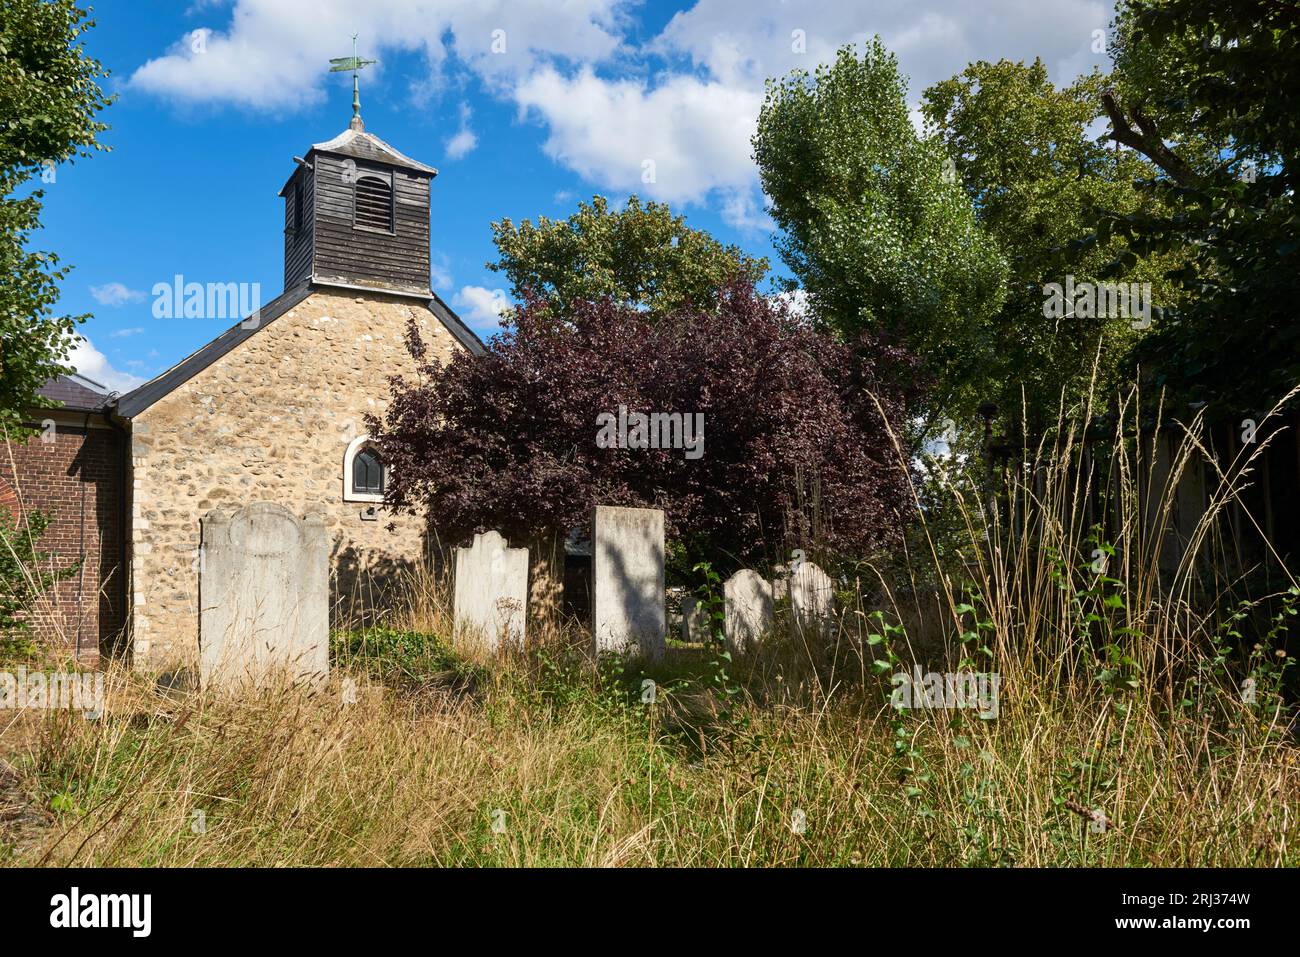 The tower of the 12th century church of St Mary the Virgin, Little Ilford, East London UK Stock Photo